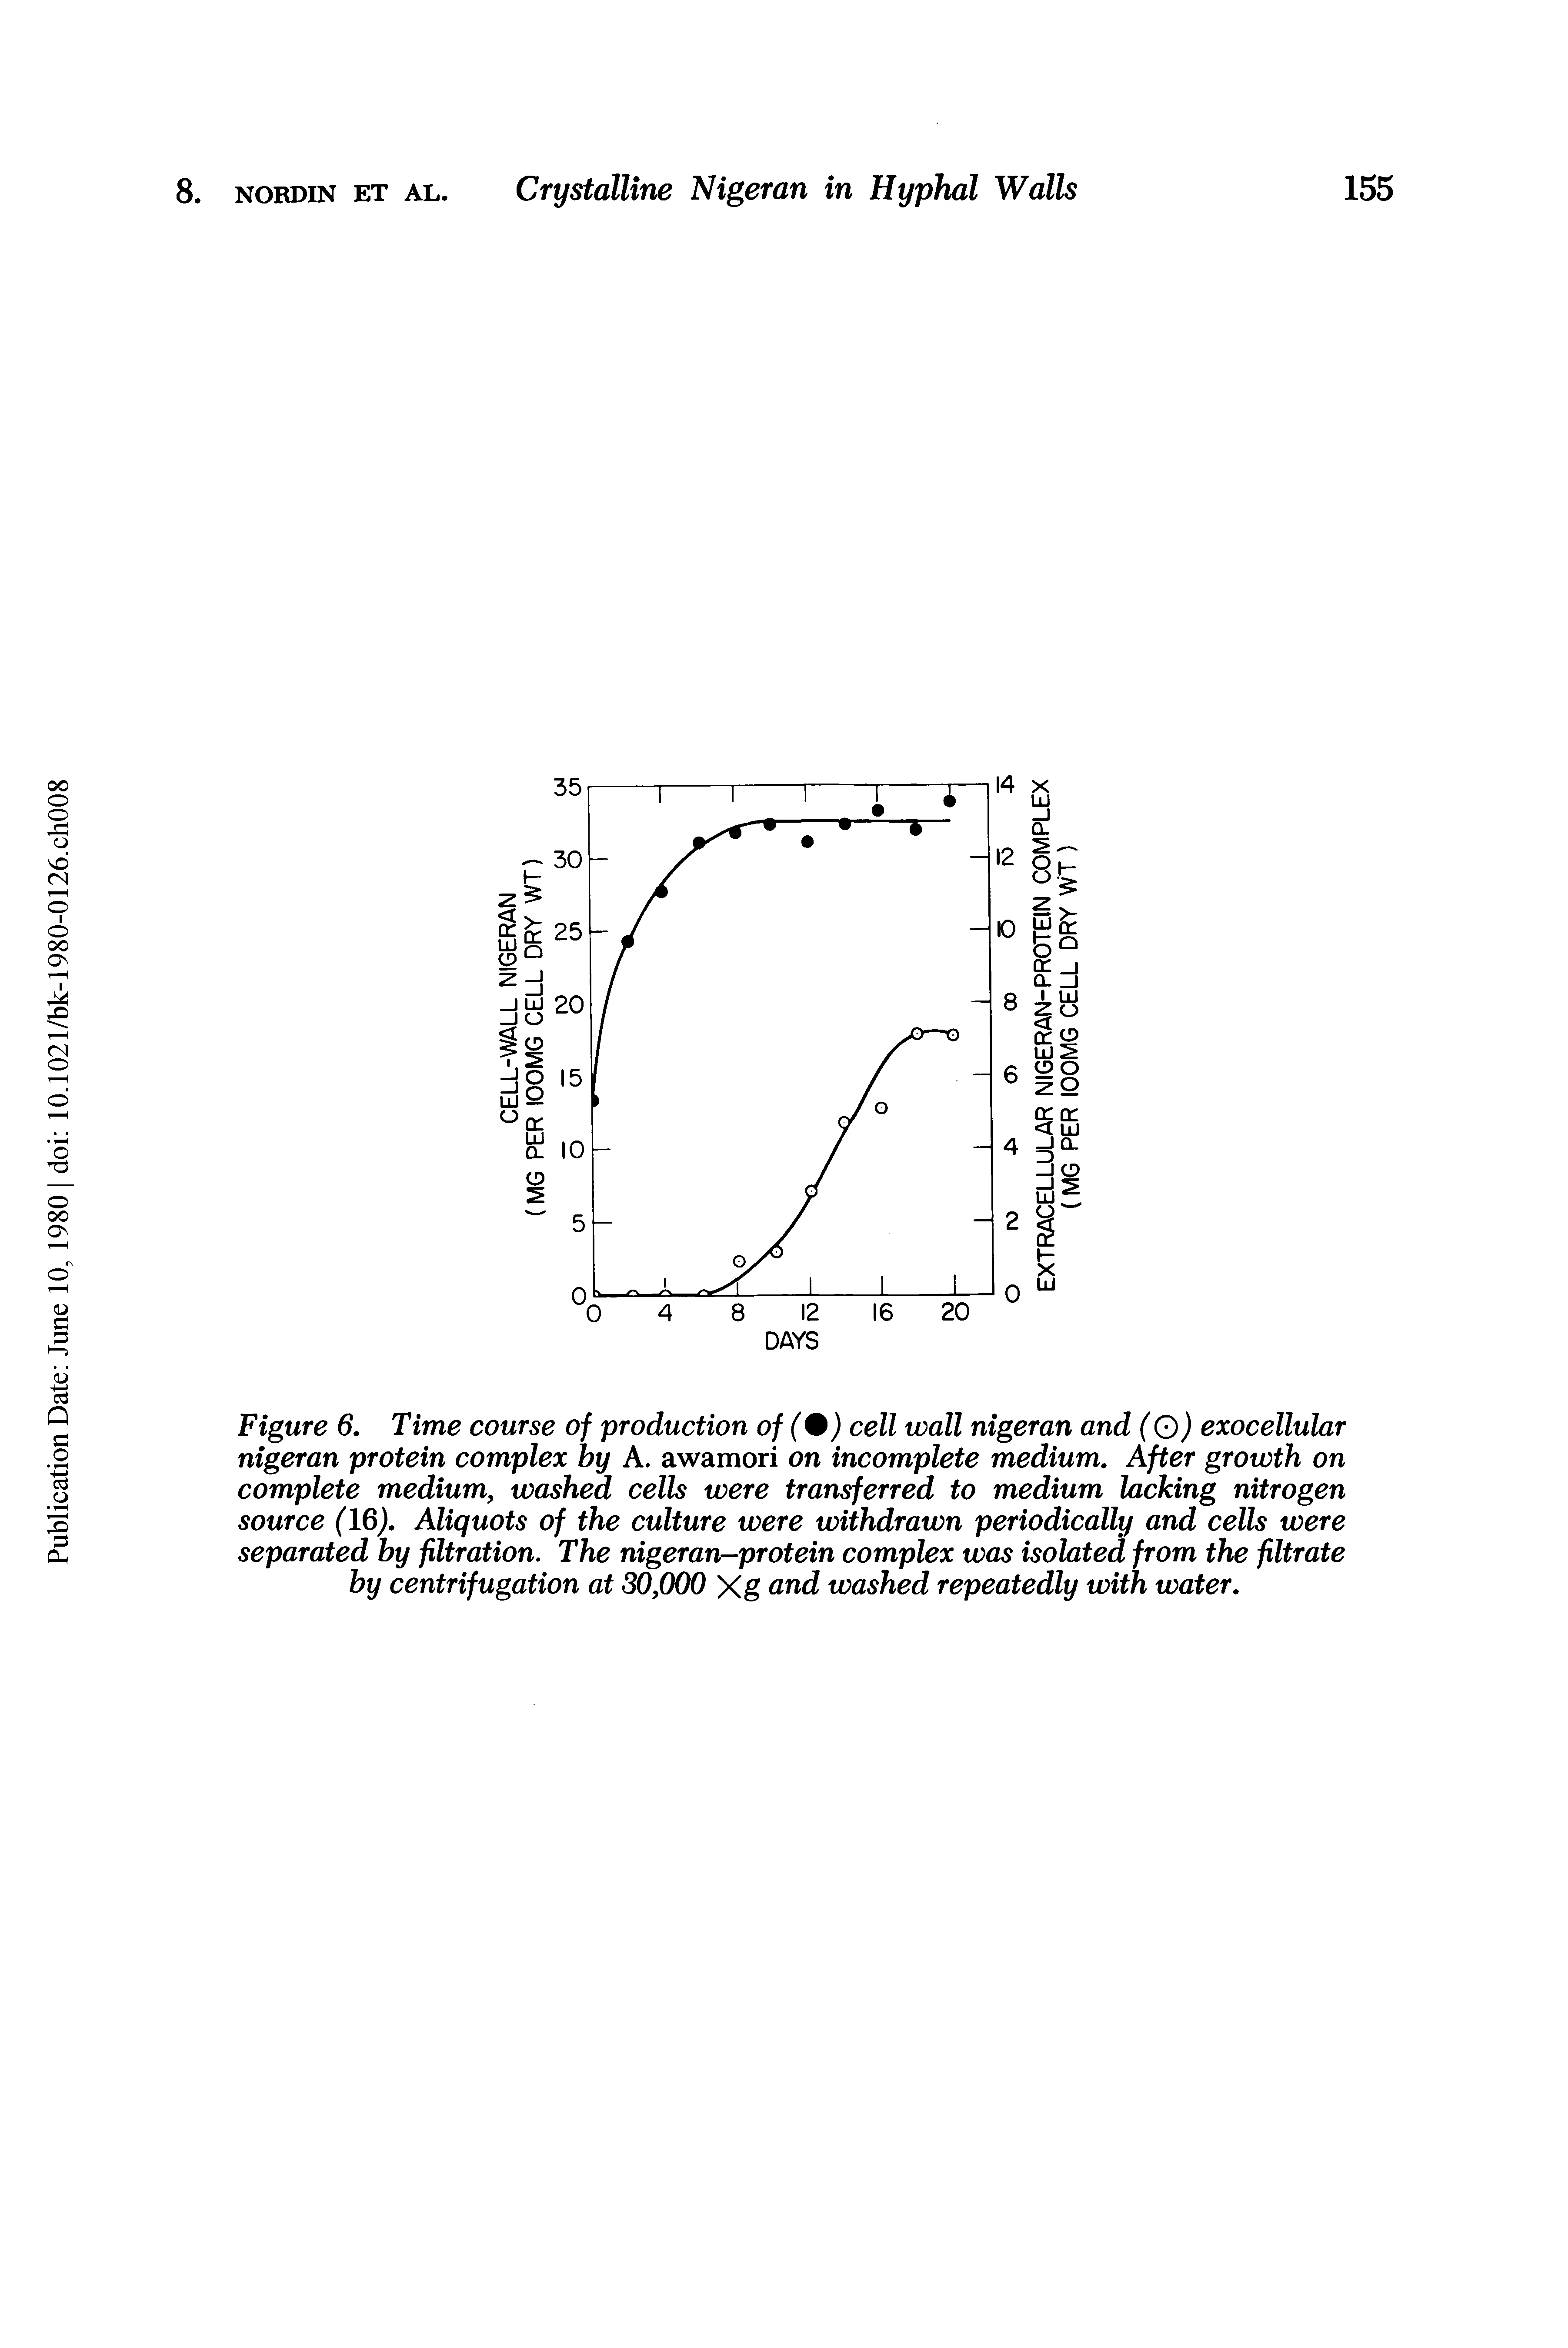 Figure 6. Time course of production of (%) cell wall nigeran and (O) exocellular nigeran protein complex by A. awamori on incomplete medium. After growth on complete medium, washed cells were transferred to medium lacking nitrogen source (16). Aliquots of the culture were withdrawn periodically and cells were separated by filtration. The nigeran-protein complex was isolated from the filtrate by centrifugation at 30,000 Xg CL d washed repeatedly with water.